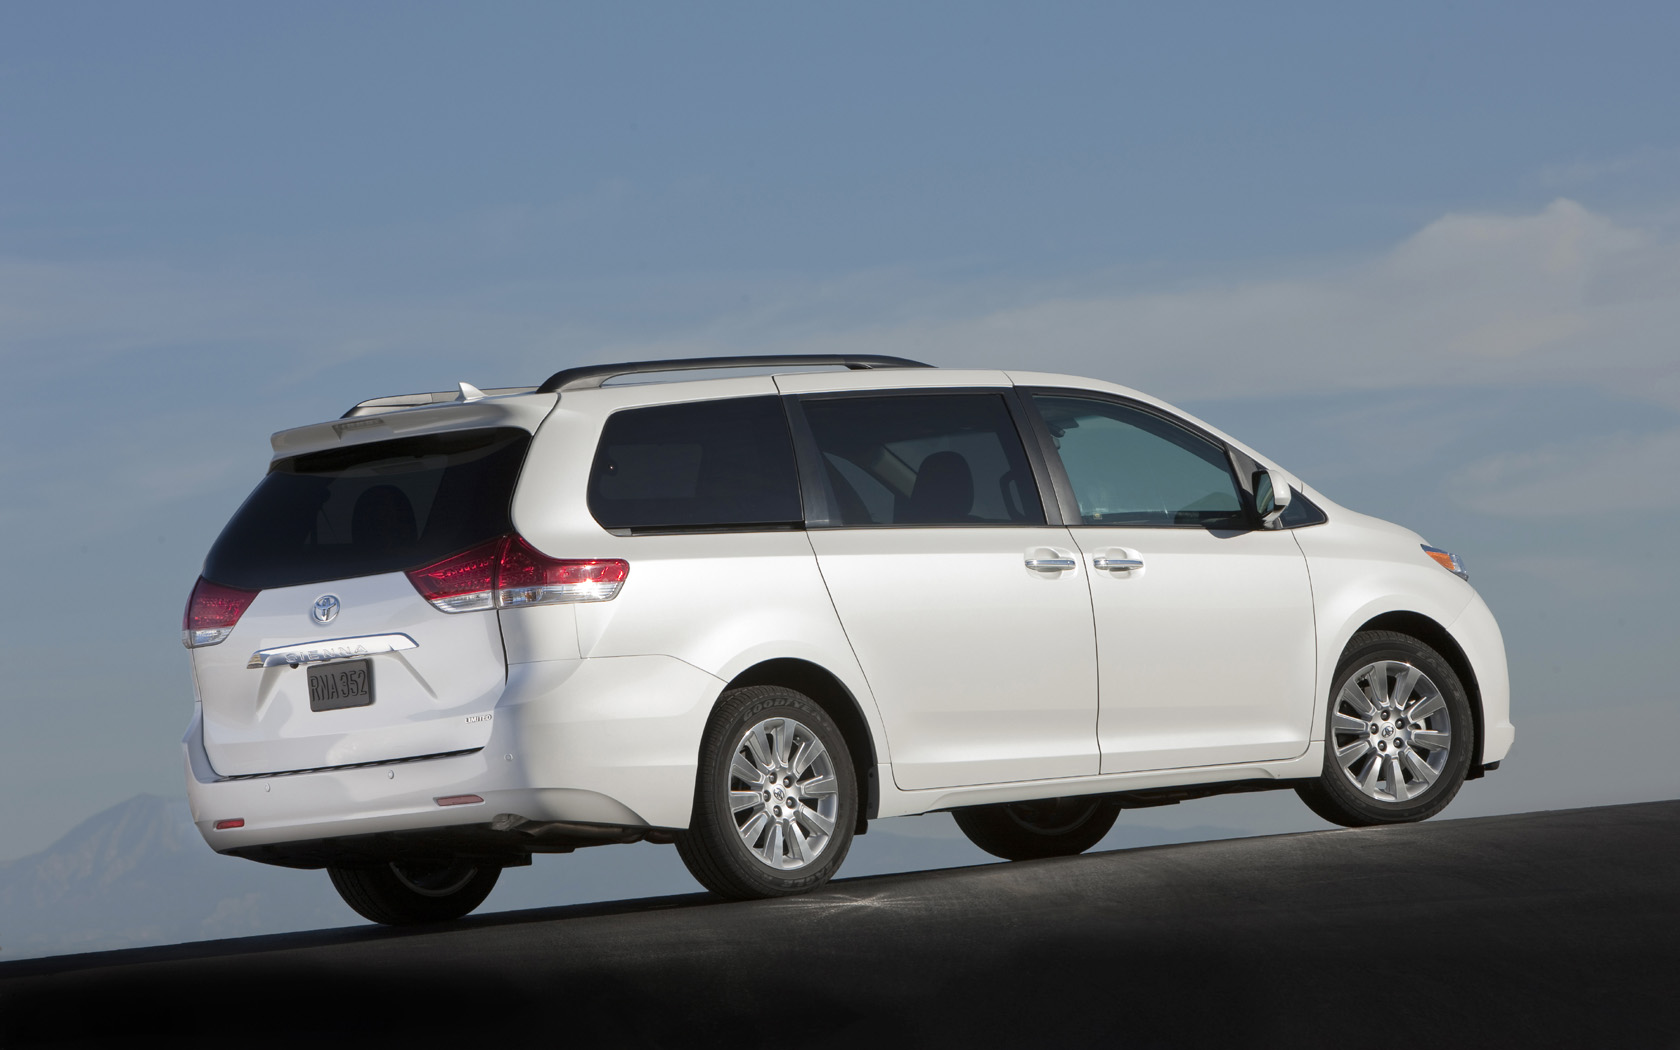 Toyota Sienna LE, XLE, SE, Limited V6 AWD - Free Widescreen Wallpaper ...